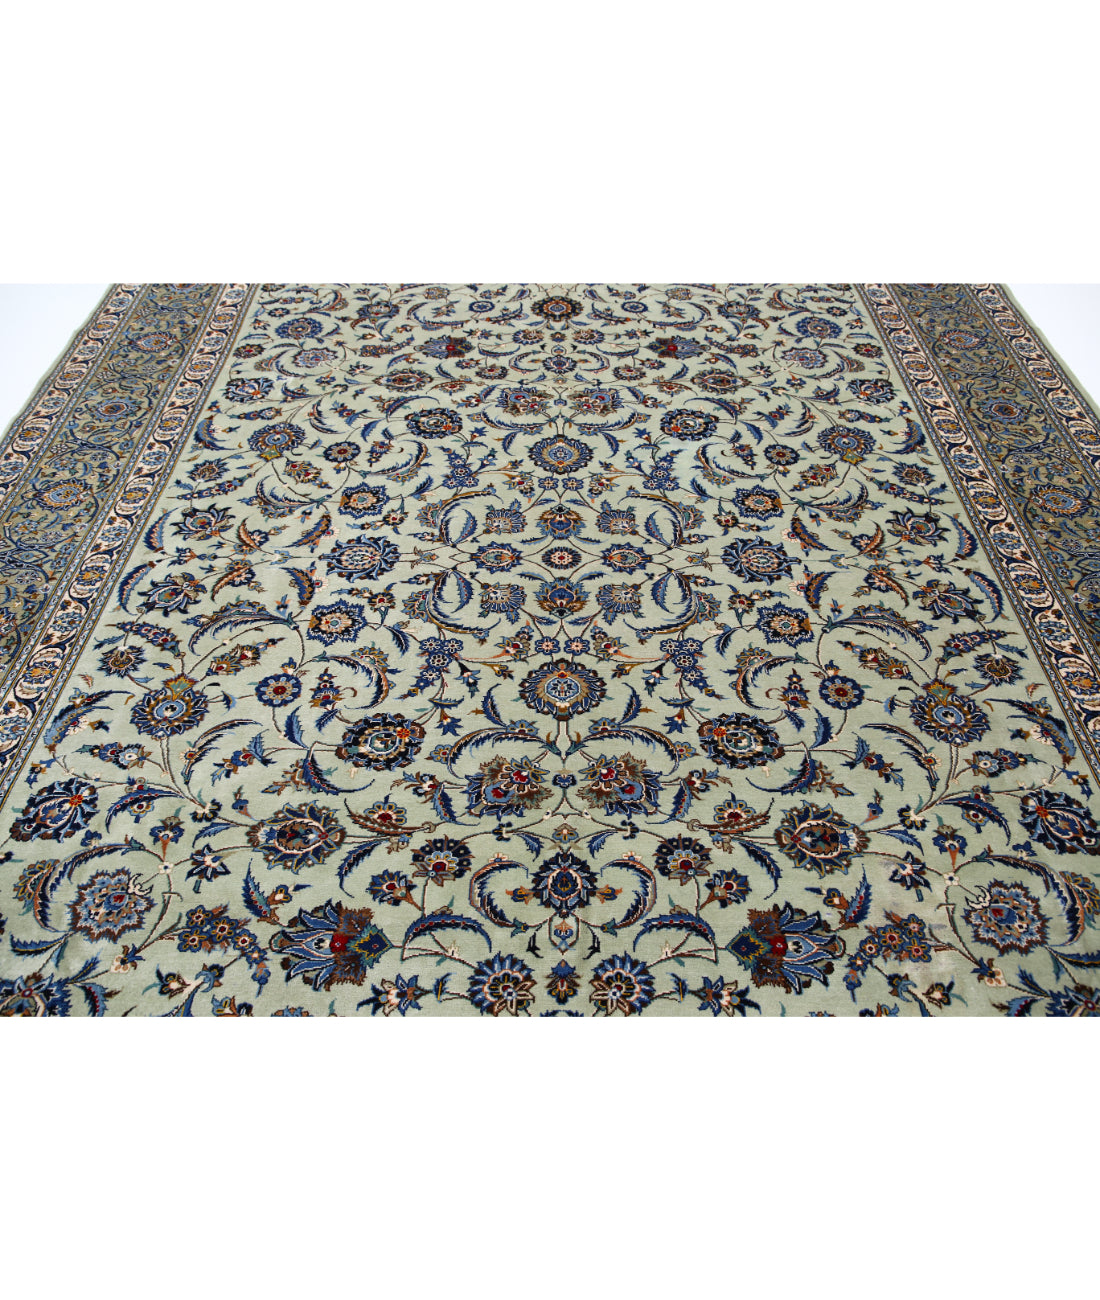 Hand Knotted Persian Kashan Wool Rug - 9'11'' x 11'6'' 9'11'' x 11'6'' (298 X 345) / Green / Blue